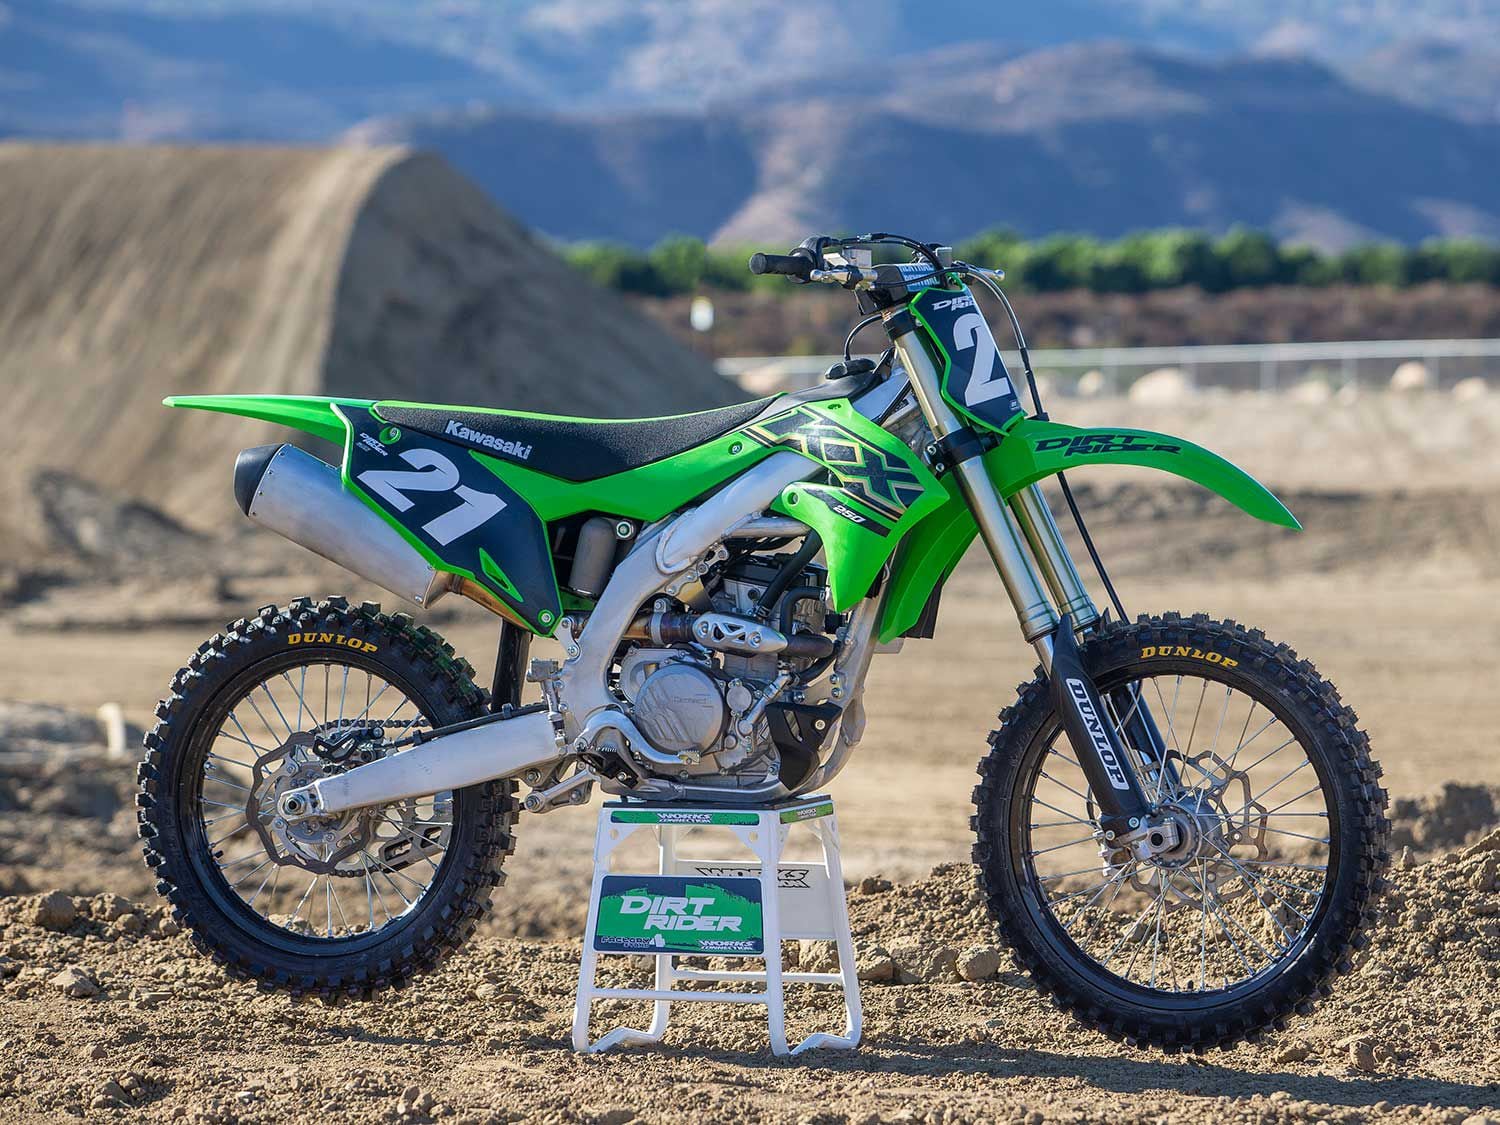 The Kawasaki KX250 is the most significantly updated 250 four-stroke motocross bike of 2021. It is improved in many ways over its predecessor, but misses the mark in a few key areas in stock trim.